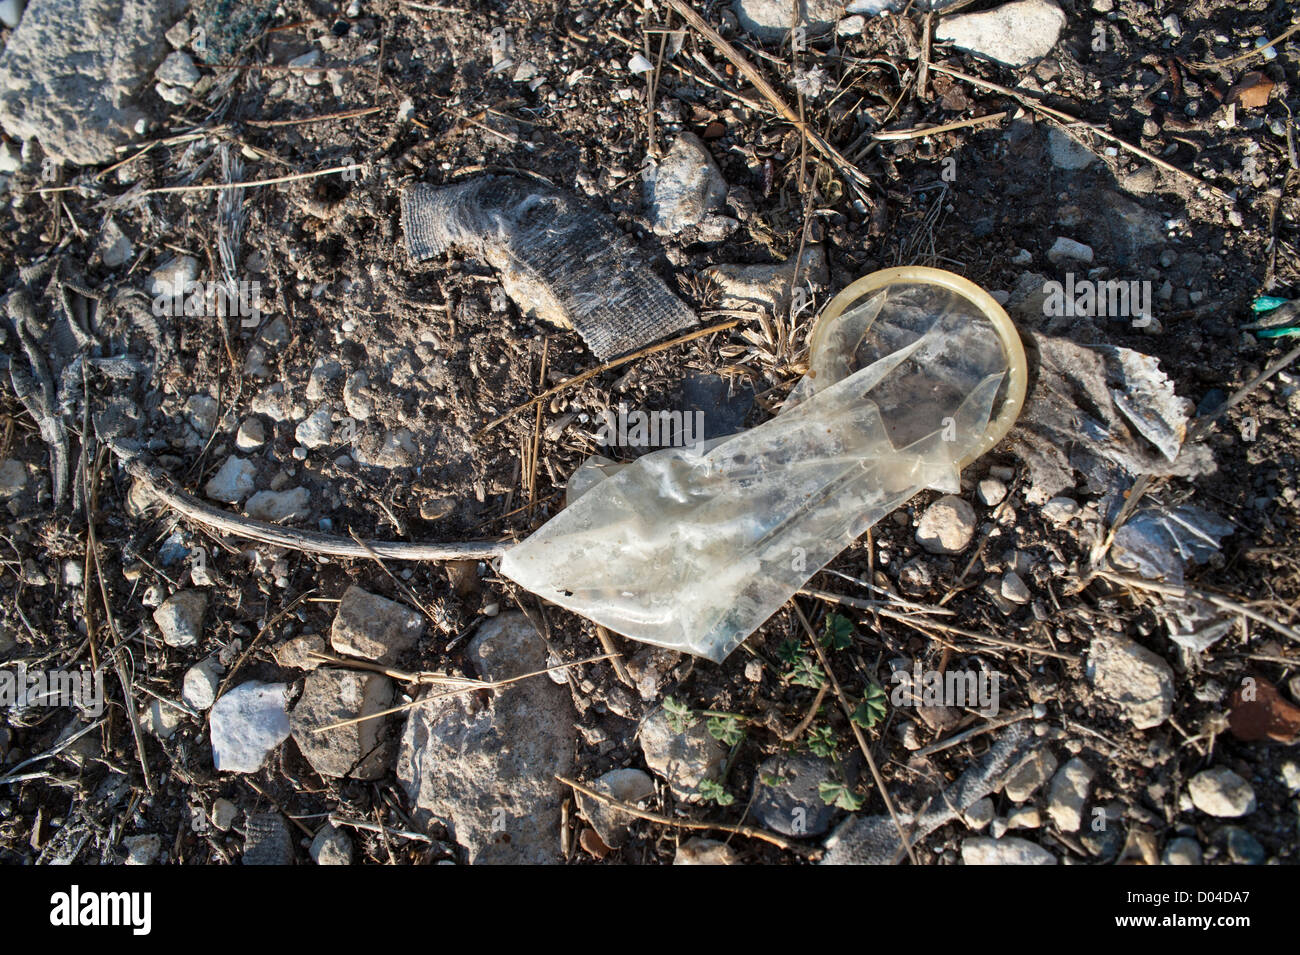 A used condom on the ground. Stock Photo